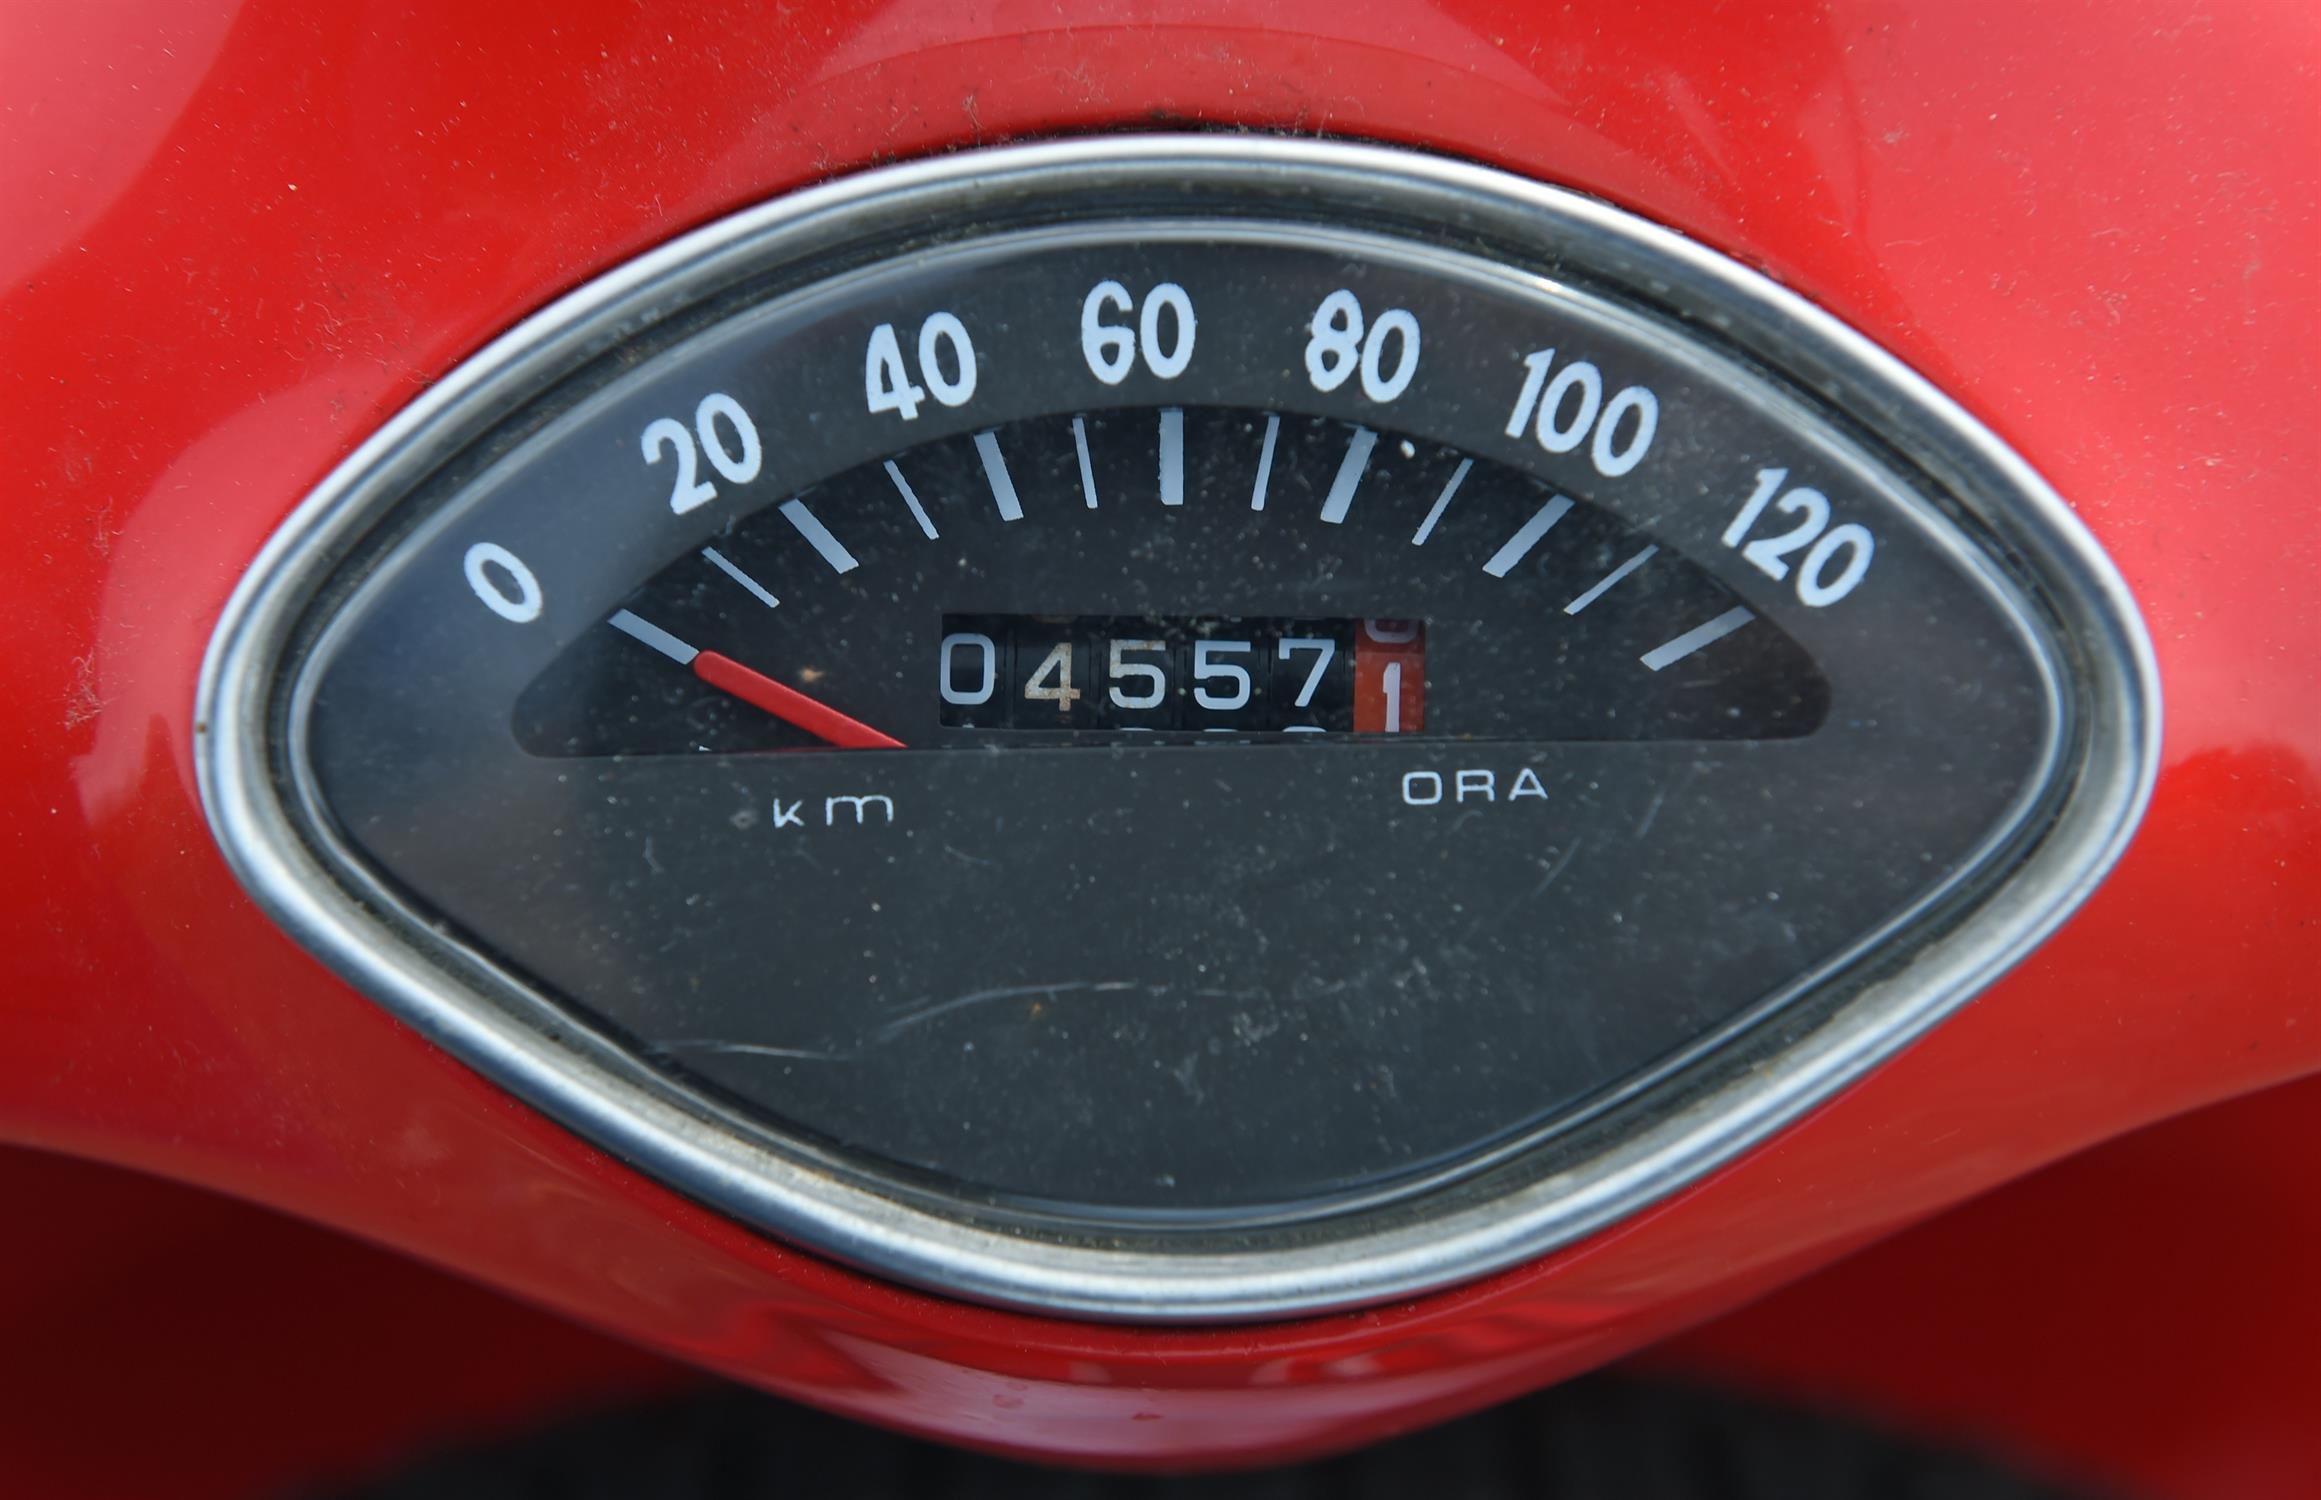 1961 Vespa VBB Standard 150cc 4 Speed. Registration number: 864 XVN. It was imported into the UK - Image 6 of 9